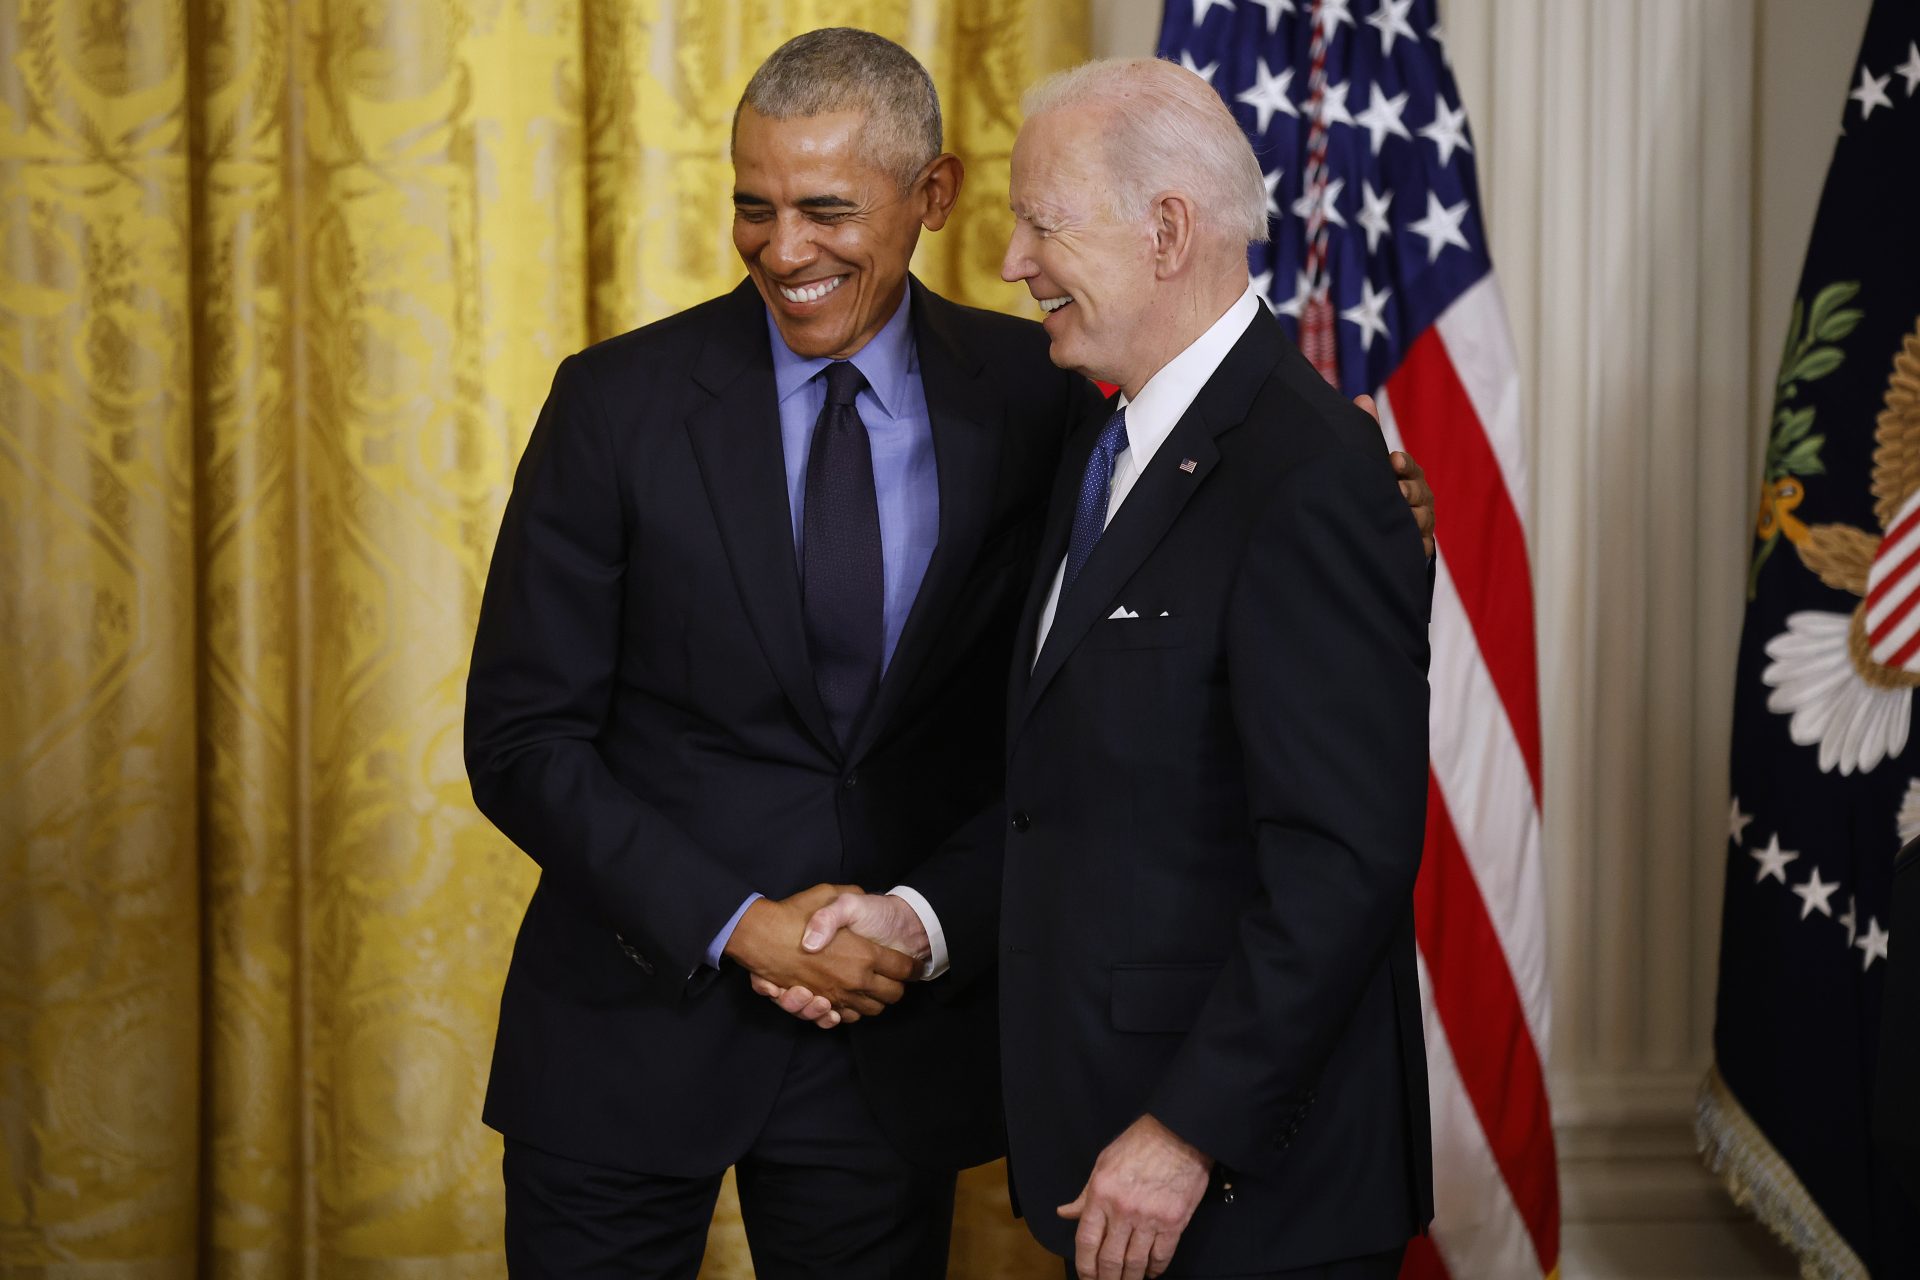 Barack Obama Jokingly Calls Joe Biden “Vice President” While Returning To The White Dwelling To Celebrate The Anniversary Of The Life like Care Act 